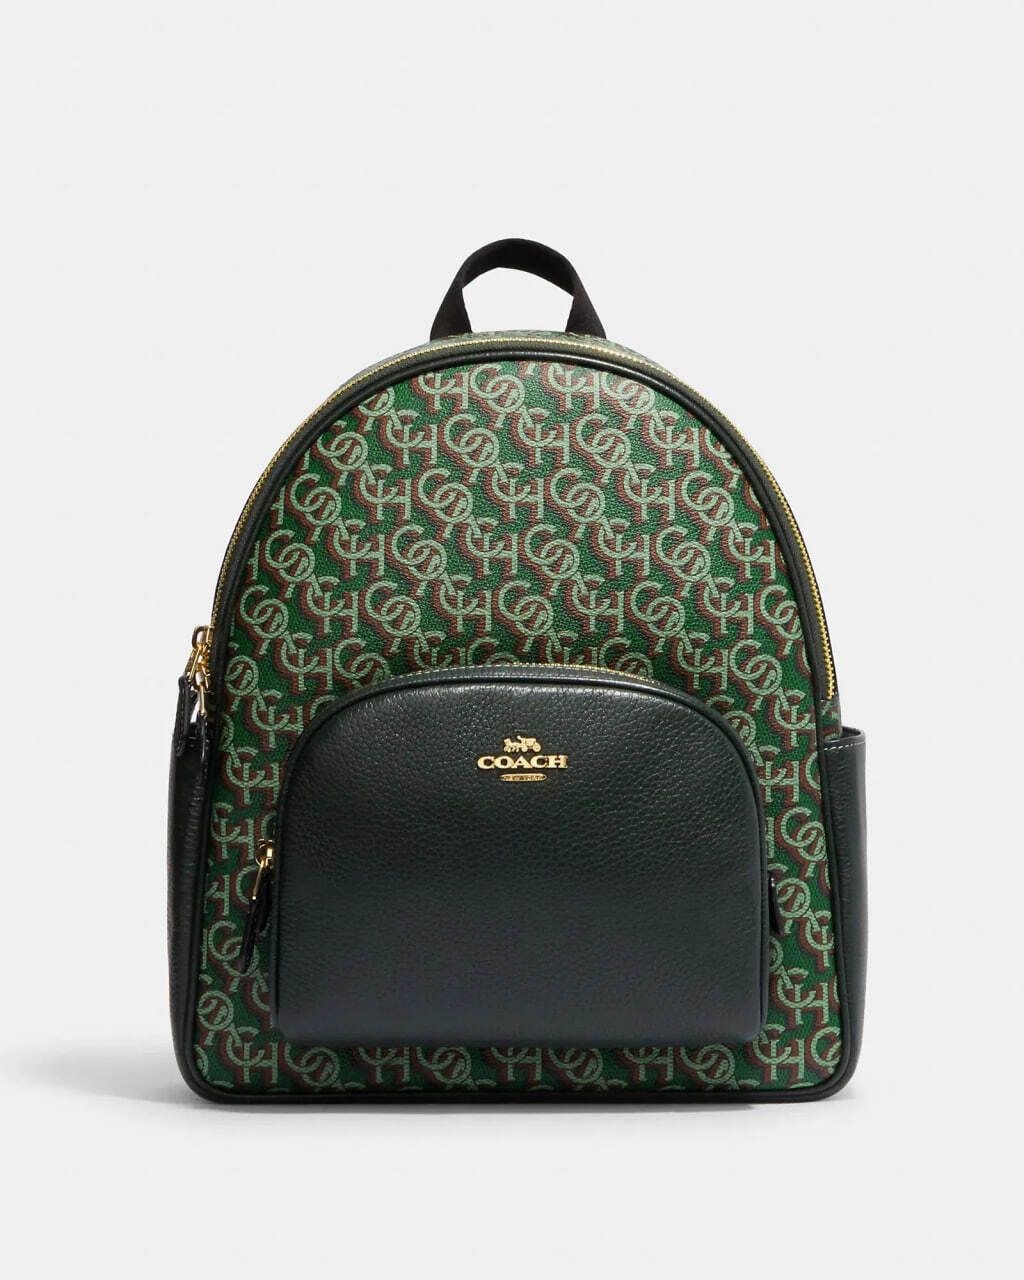 handbagbranded.com getlush outlet personalshopper usa Coach malaysia ready stock Coach Court Backpack With Coach Monogram Print in Green